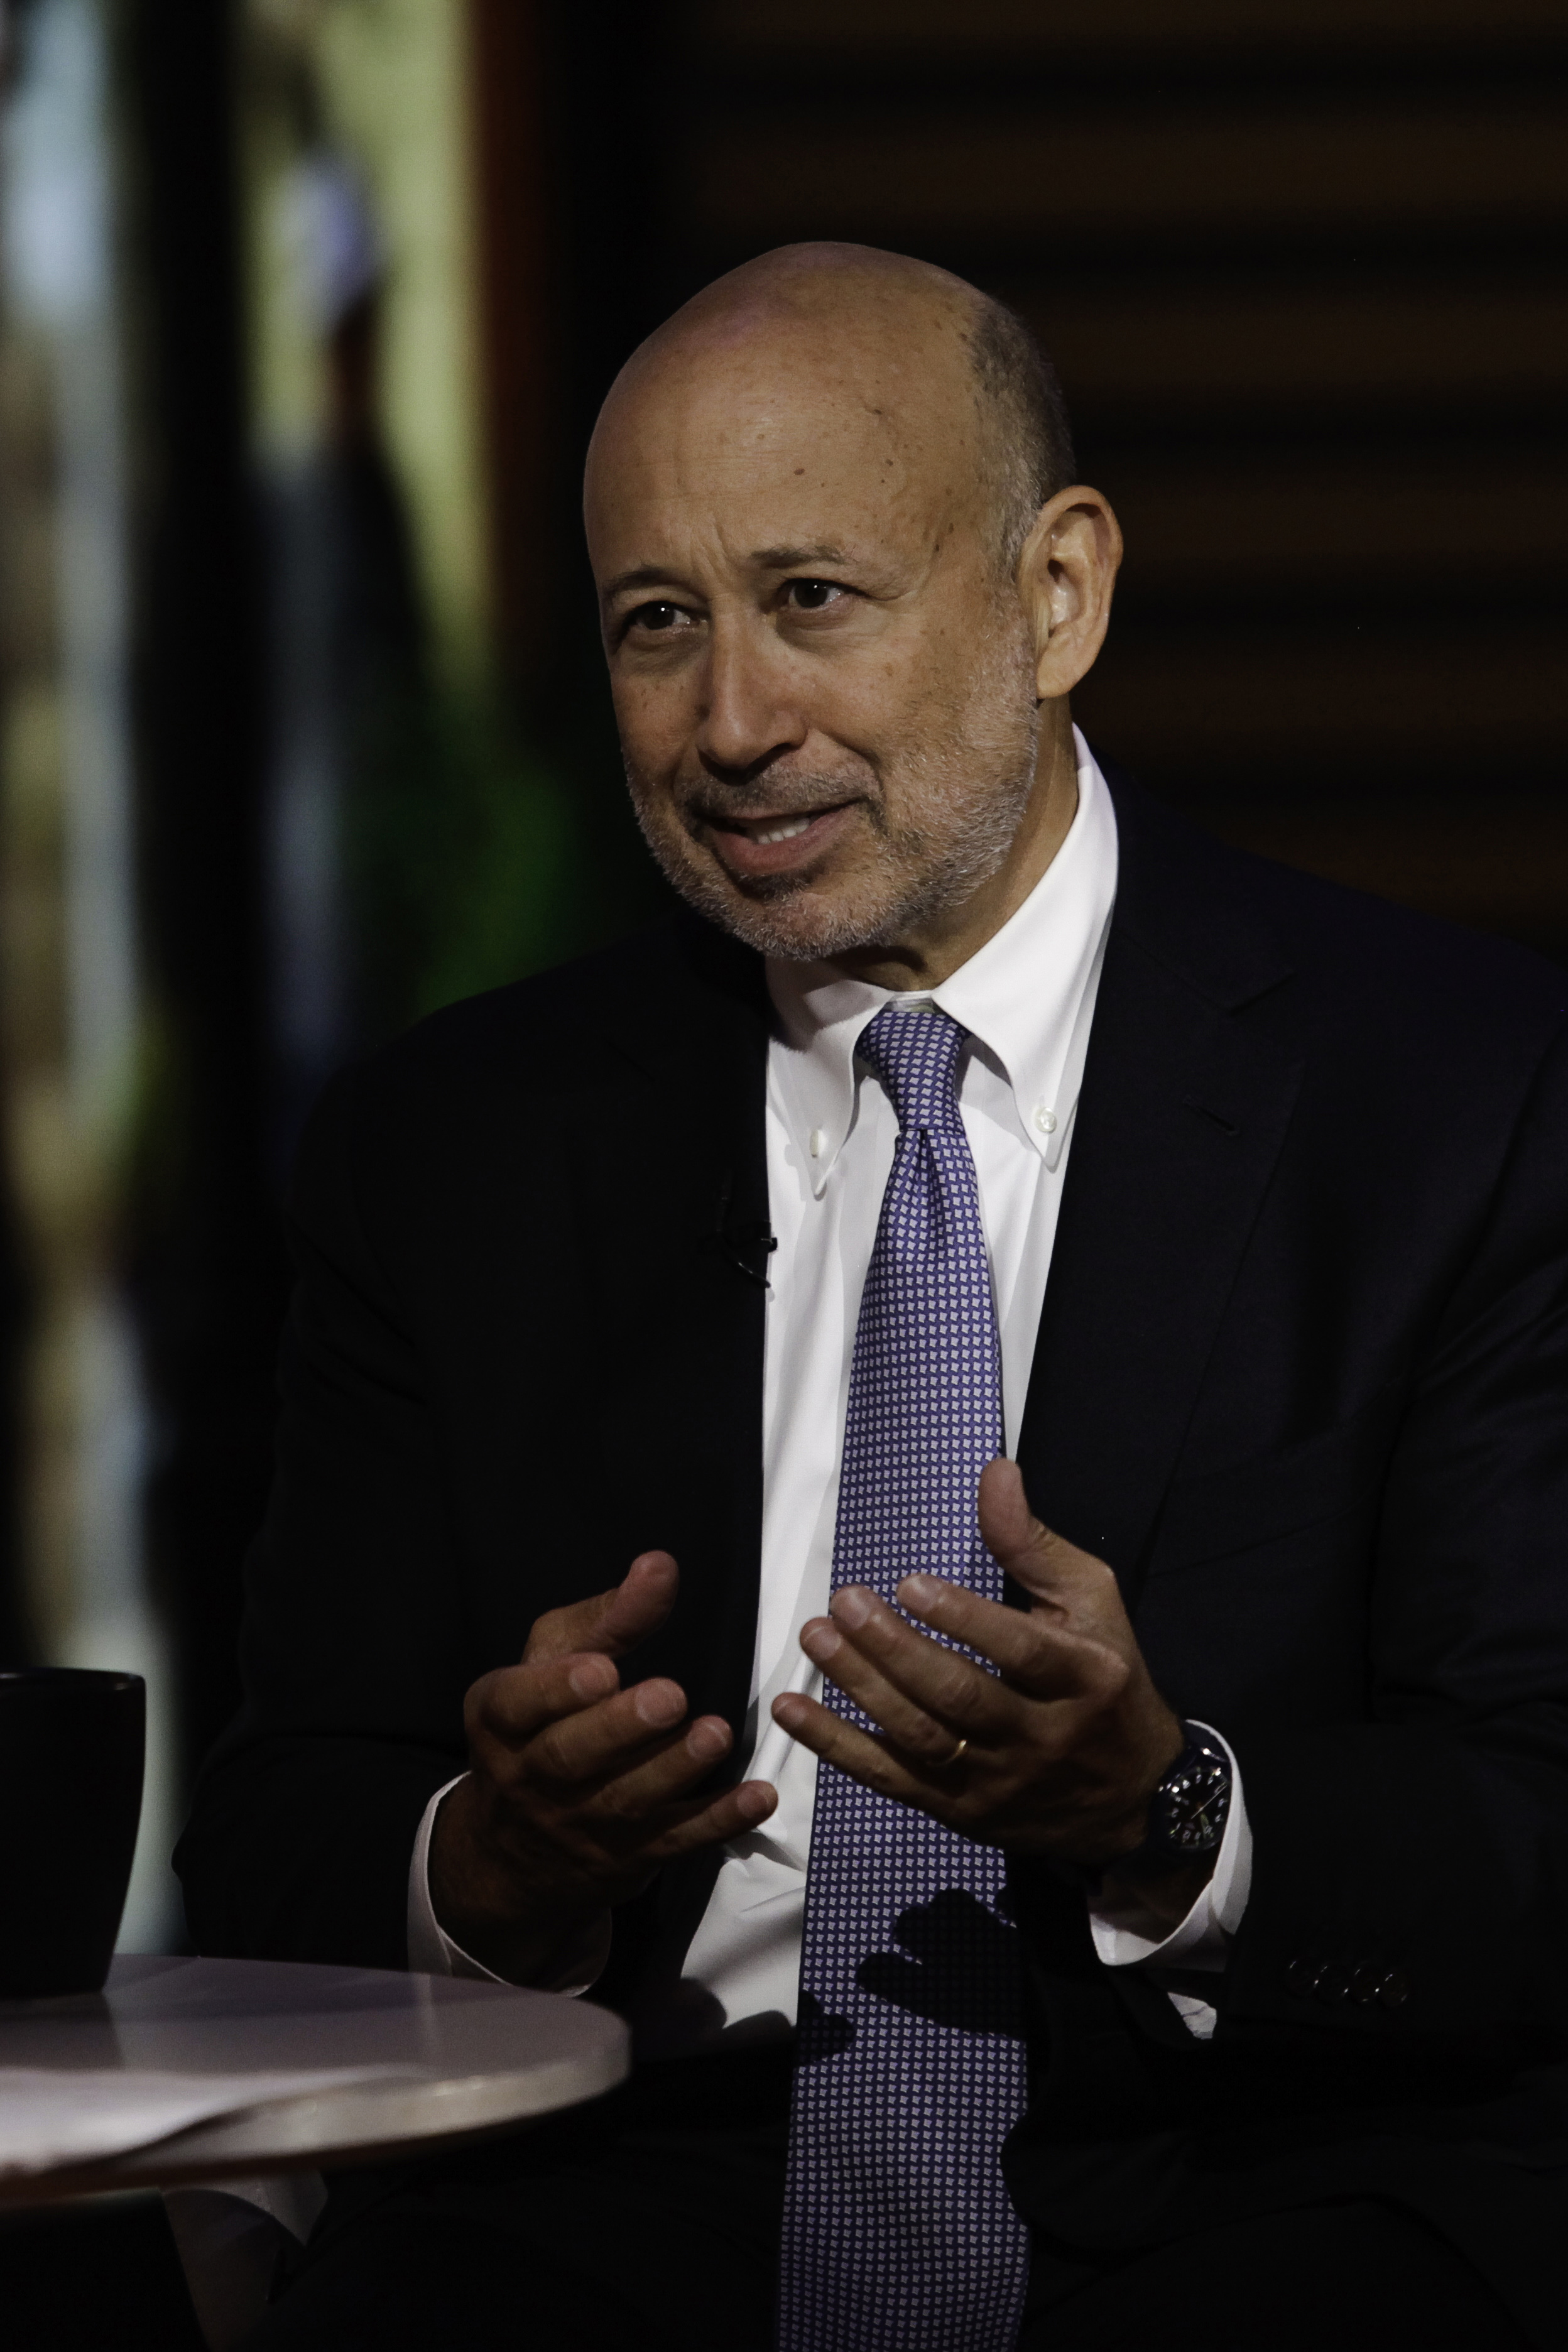 Lloyd Blankfein, CEO of Goldman Sachs Group, at a TV interview in New York City on July 29, 2015.